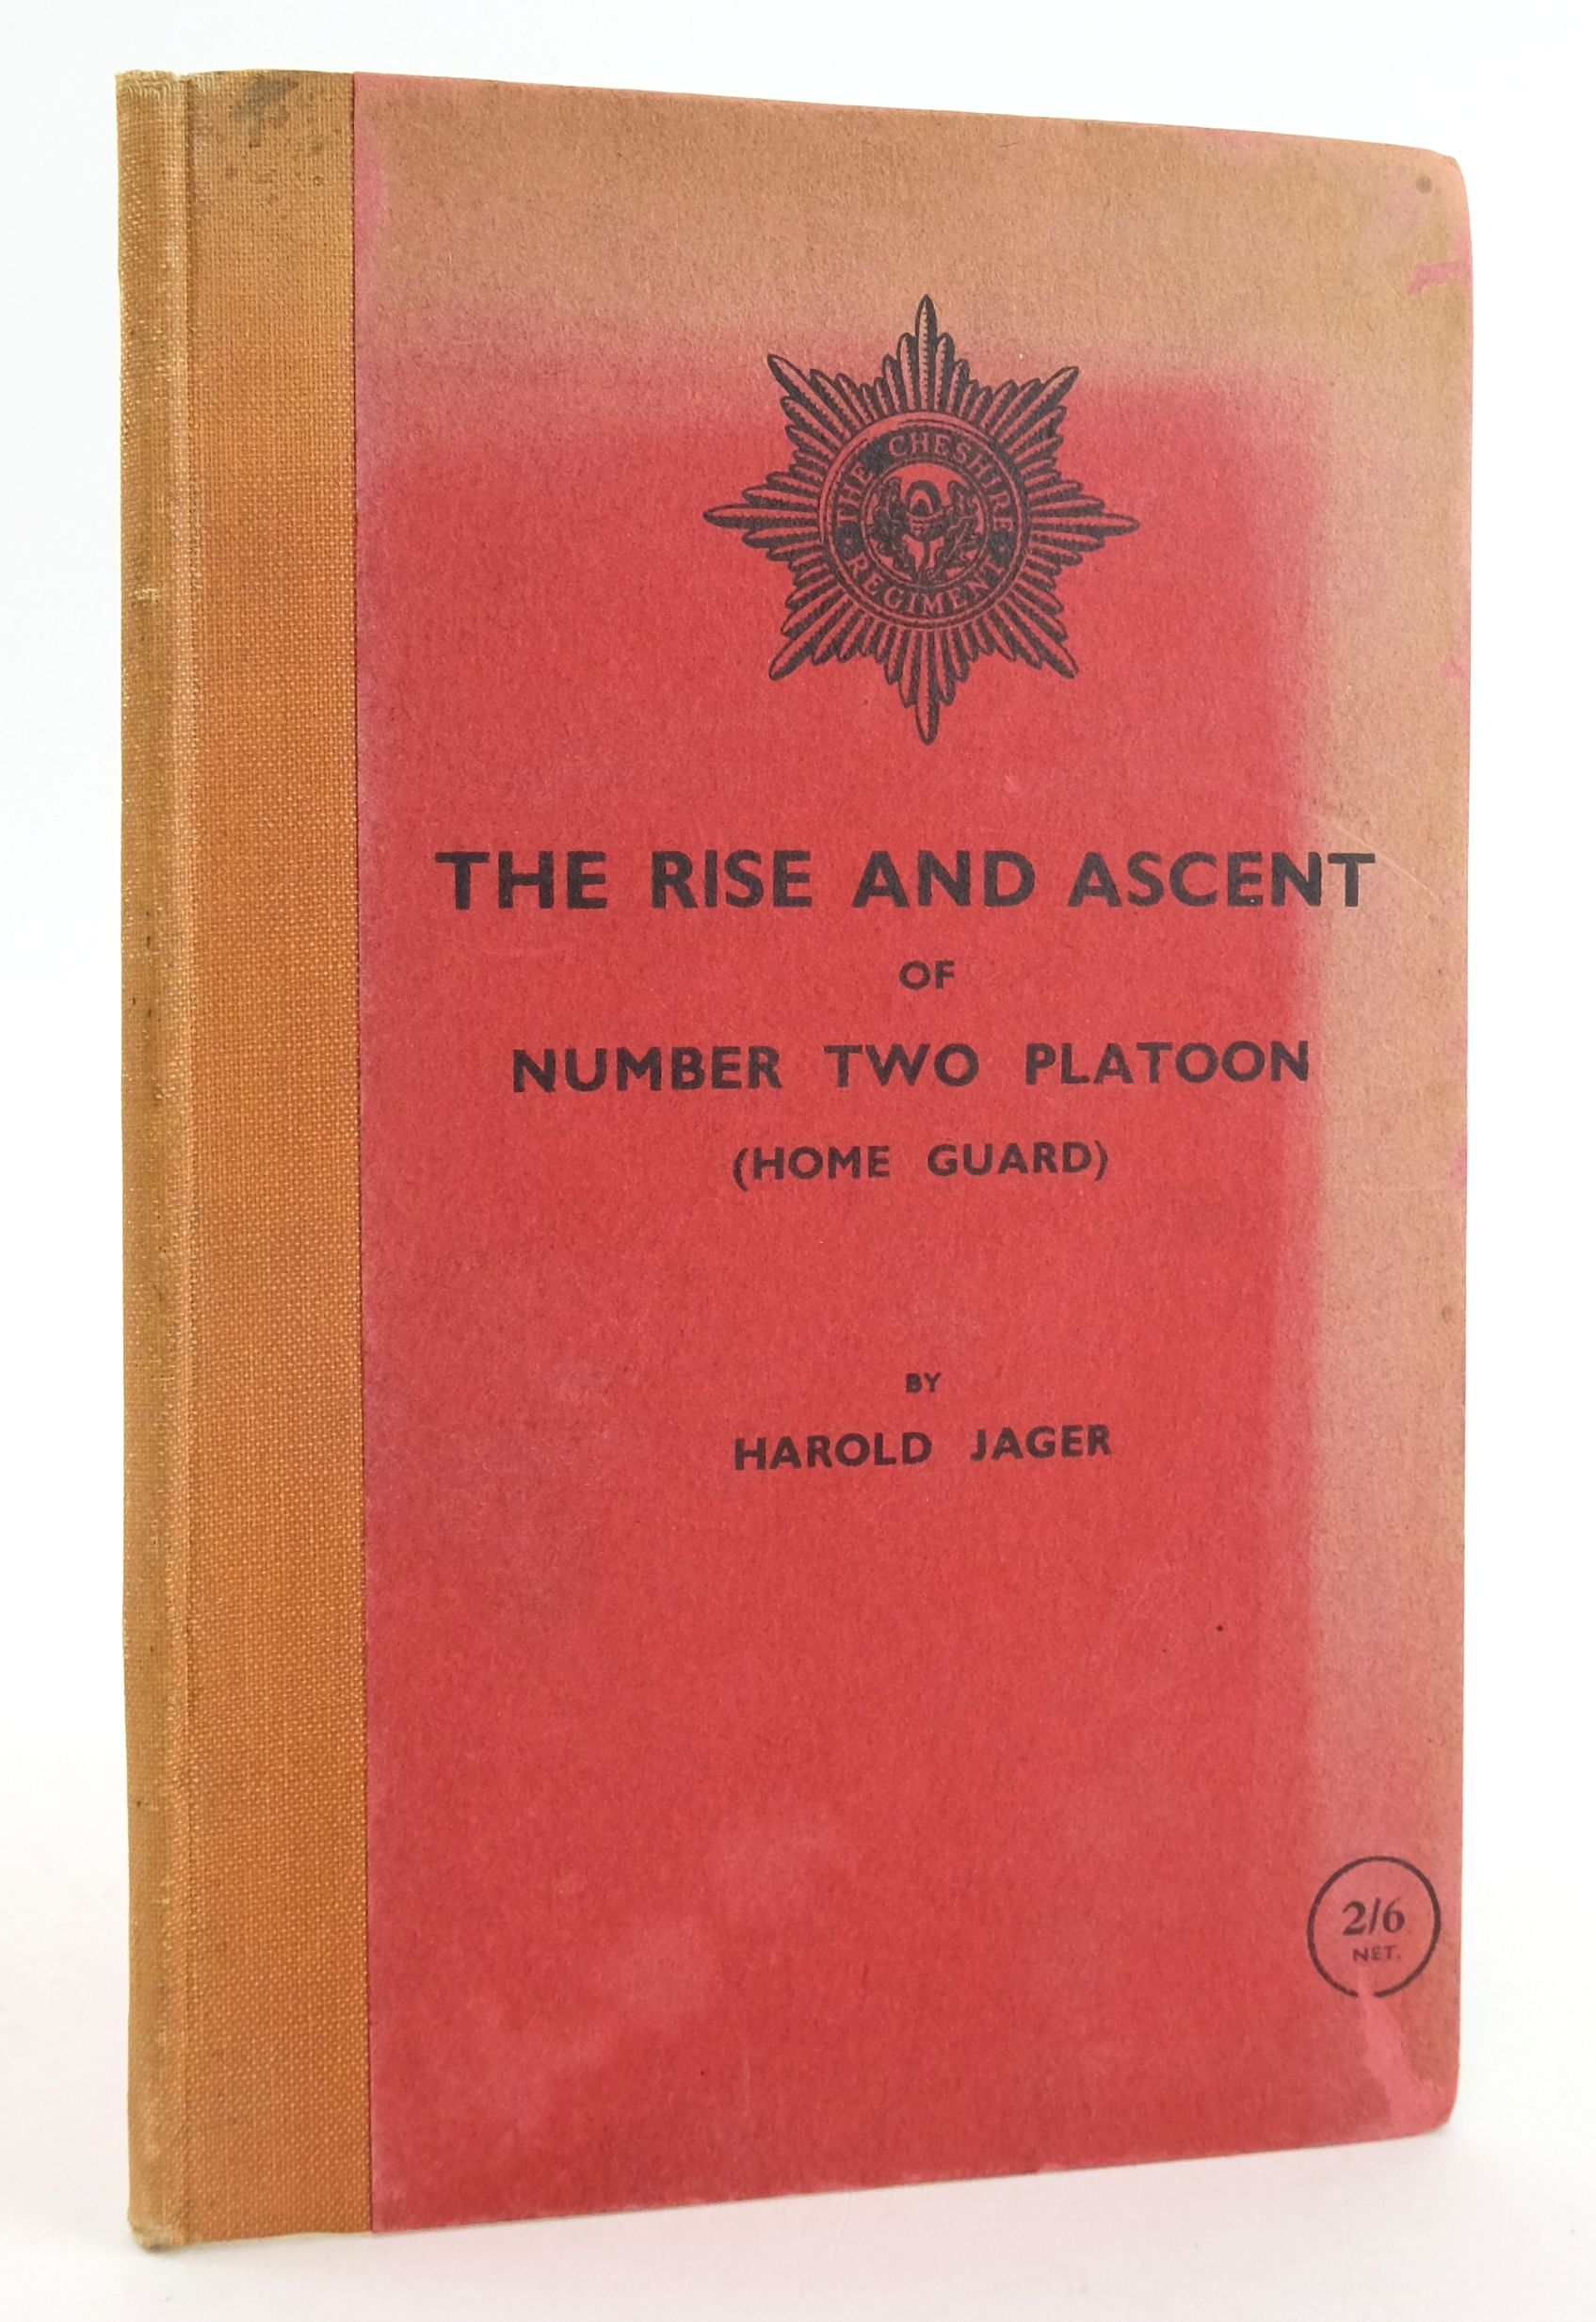 Photo of THE RISE AND ASCENT OF &quot;NUMBER TWO PLATOON&quot; written by Jager, Harold published by Daily Post (STOCK CODE: 1824404)  for sale by Stella & Rose's Books